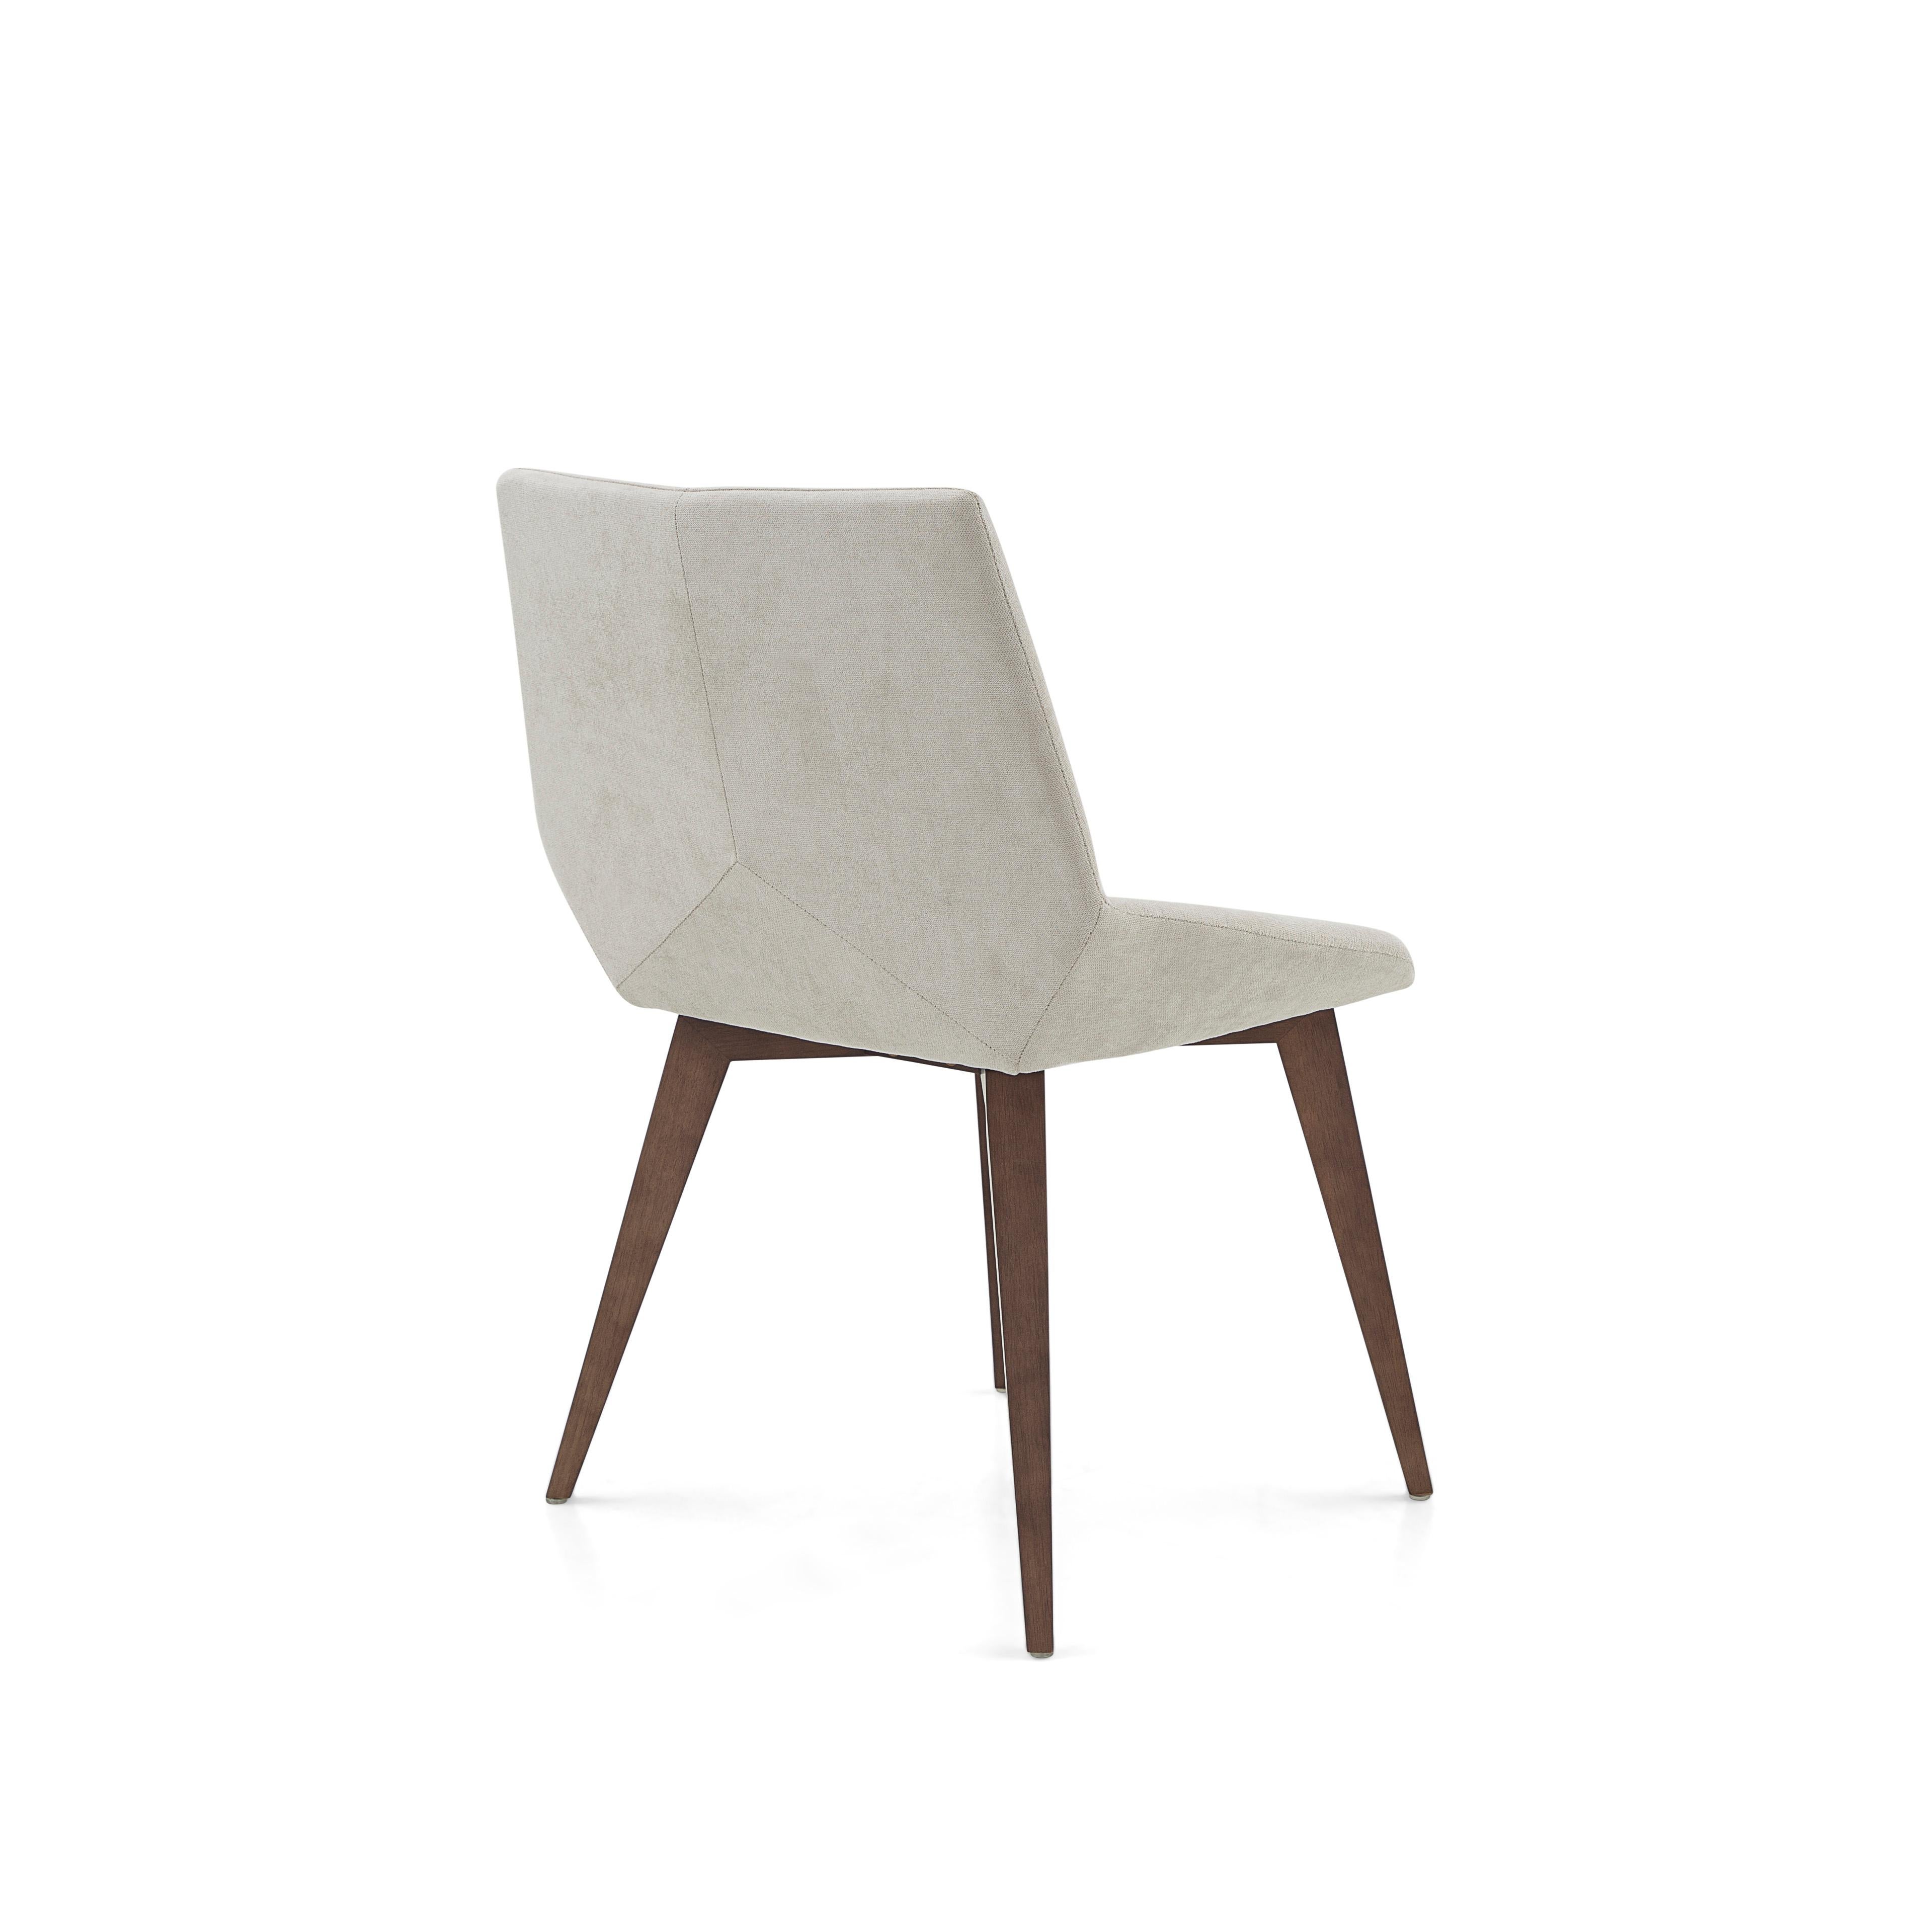 Geometric Cubi Dining Chair with Walnut Wood Base and Light Gray Fabric In New Condition For Sale In Miami, FL